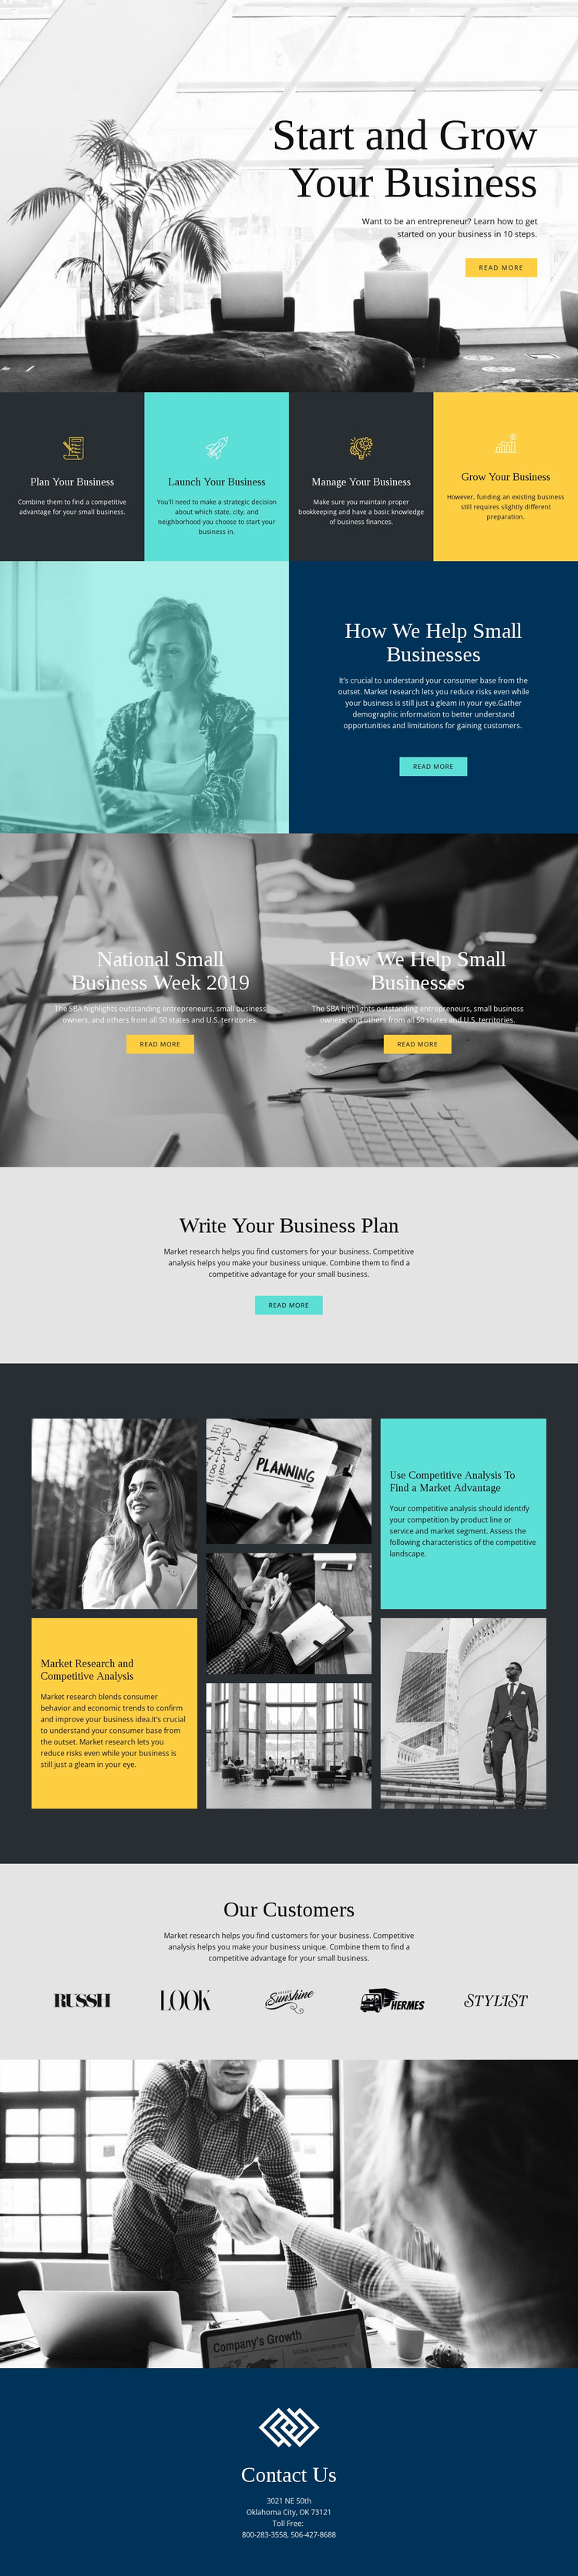 Start and grow your business Website Mockup